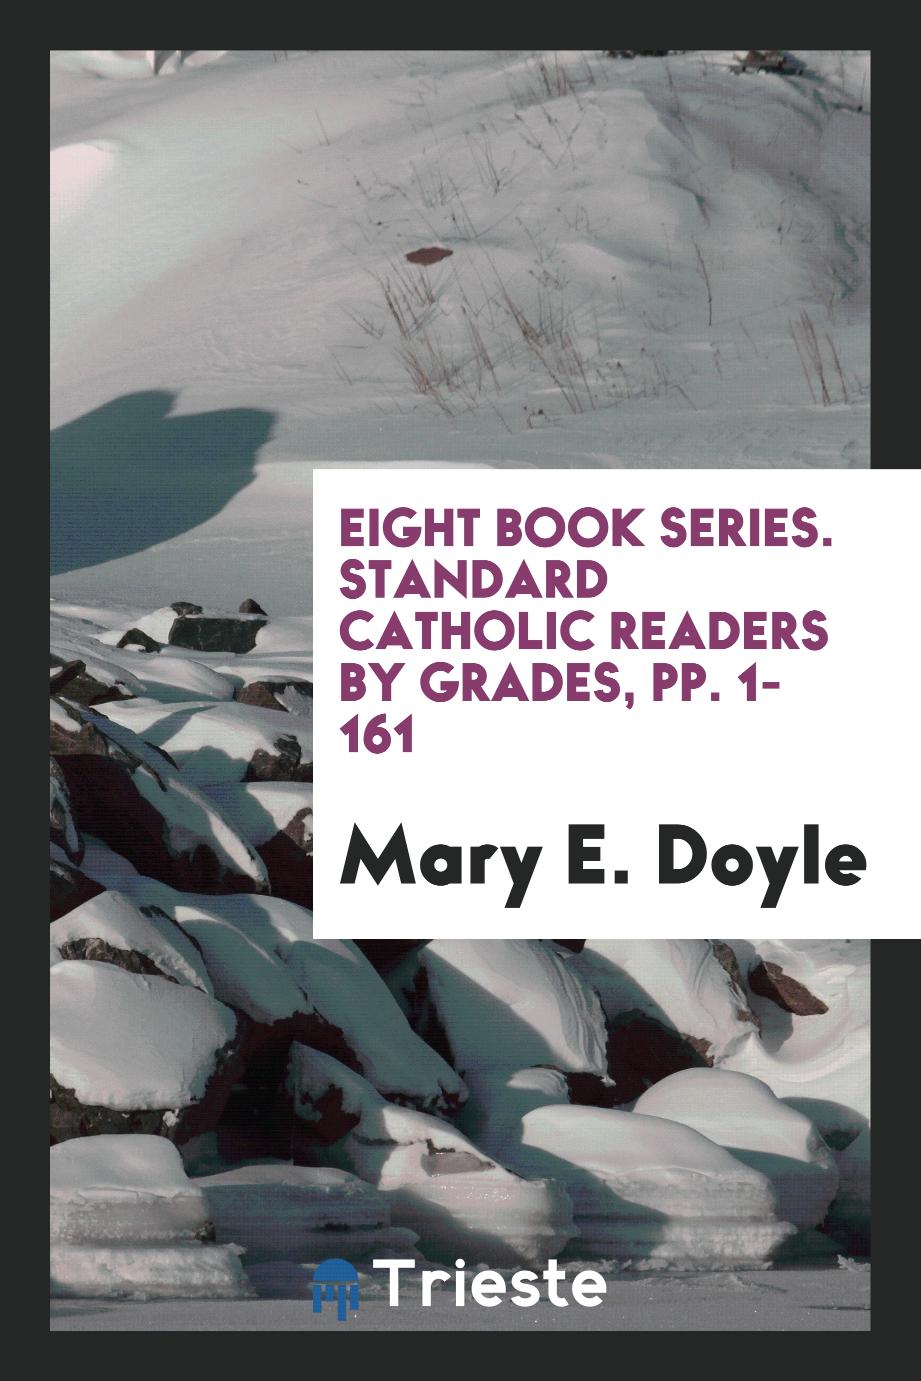 Eight Book Series. Standard Catholic Readers by Grades, pp. 1-161